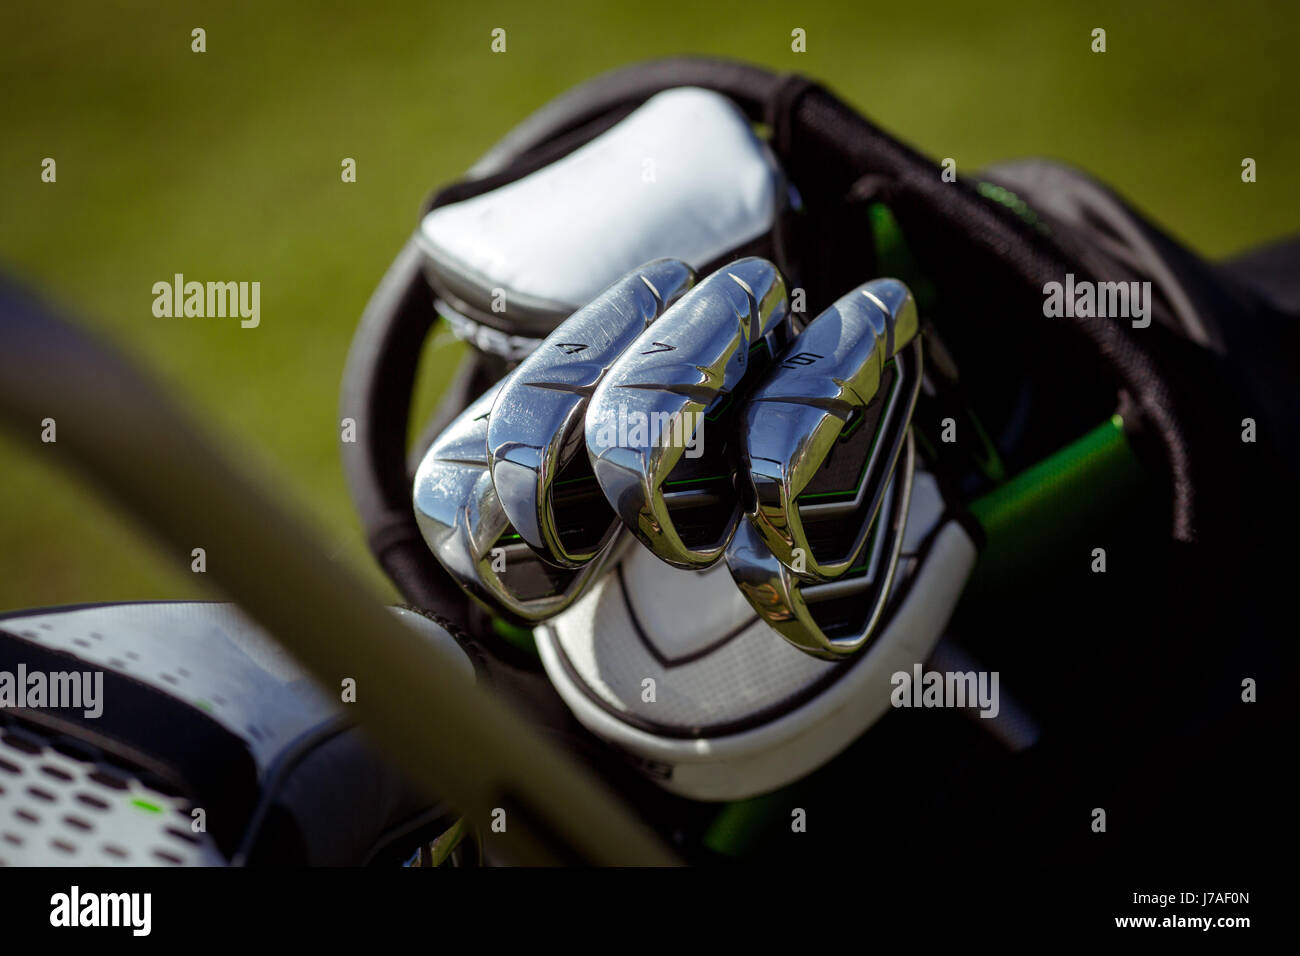 Golf clubs in bag Stock Photo